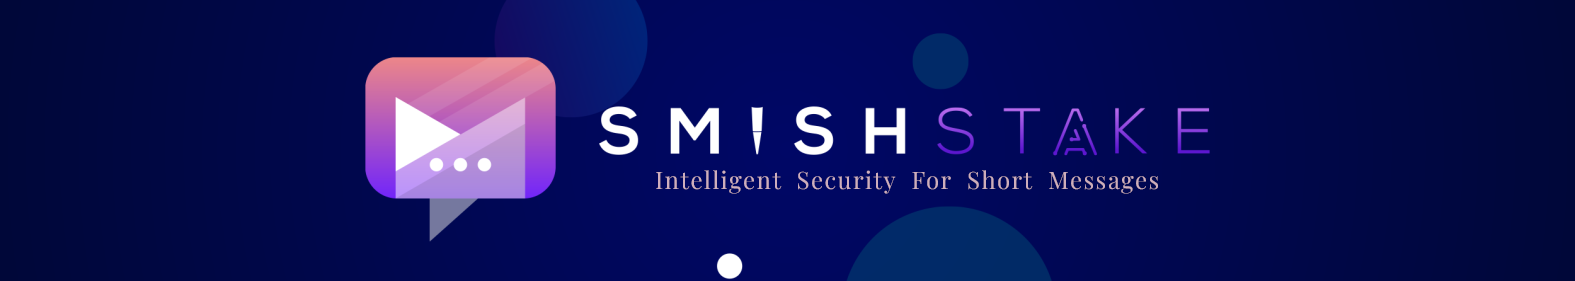 SmishStake Banner and logo - Intelligent Security for Short Messages